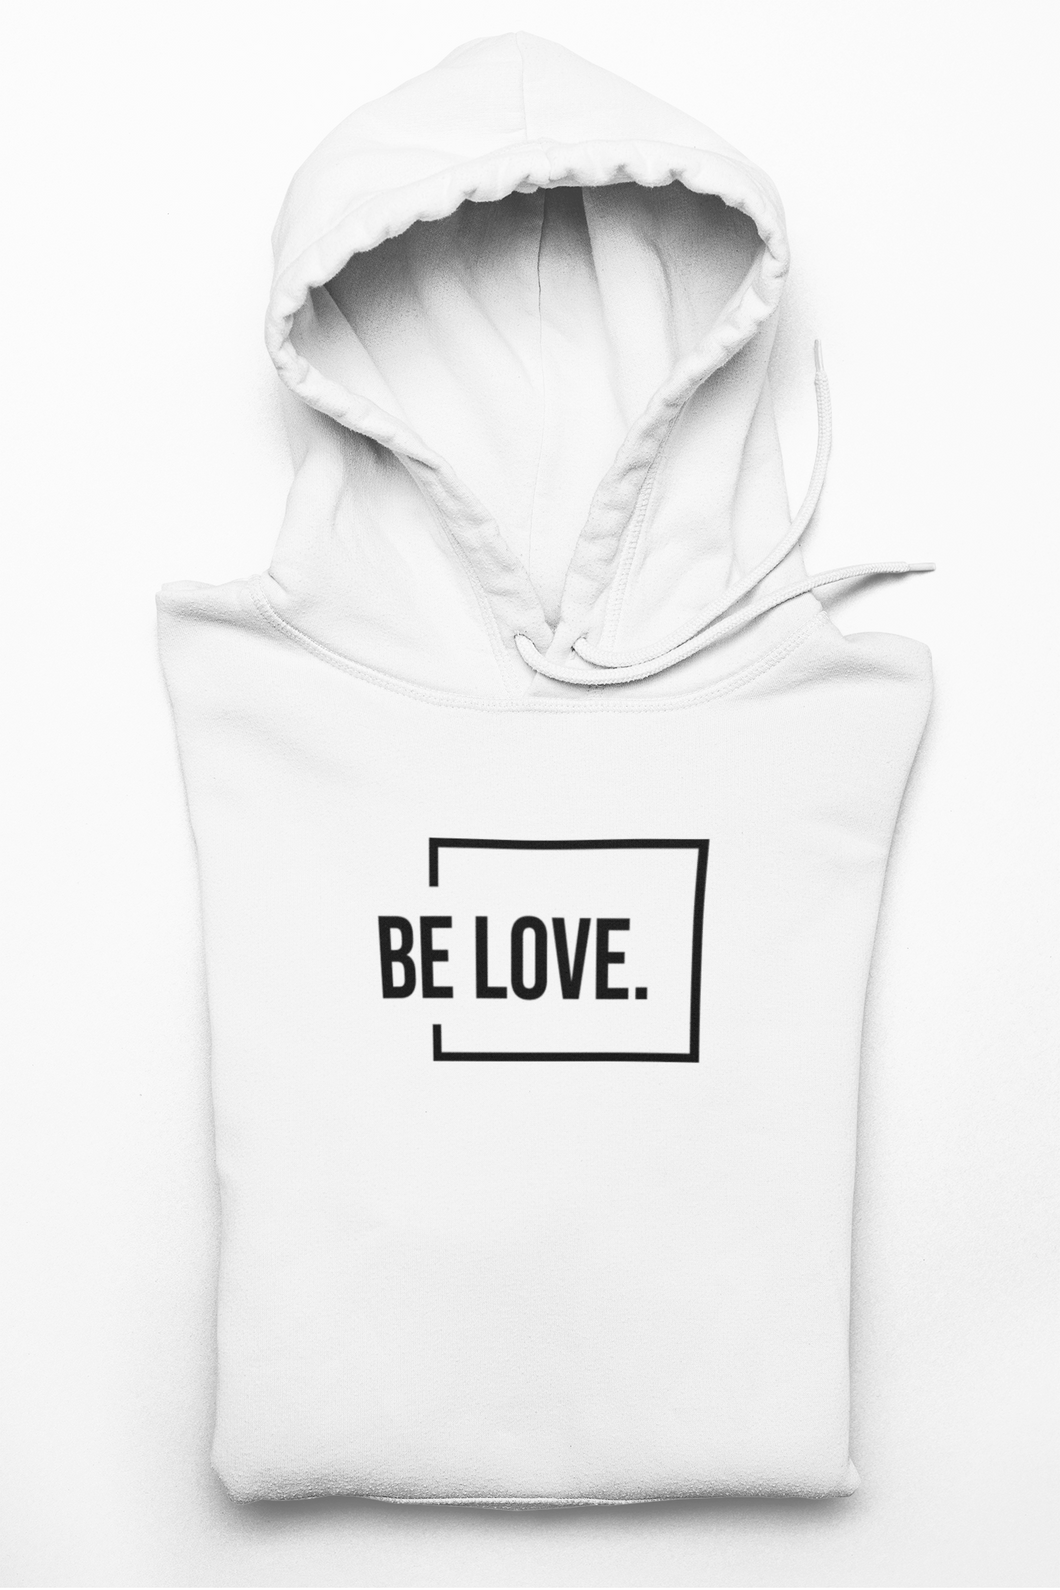 Buy Online Unique High Quality “BE LOVE” Wesley Hoodie - J. Wesley Collection